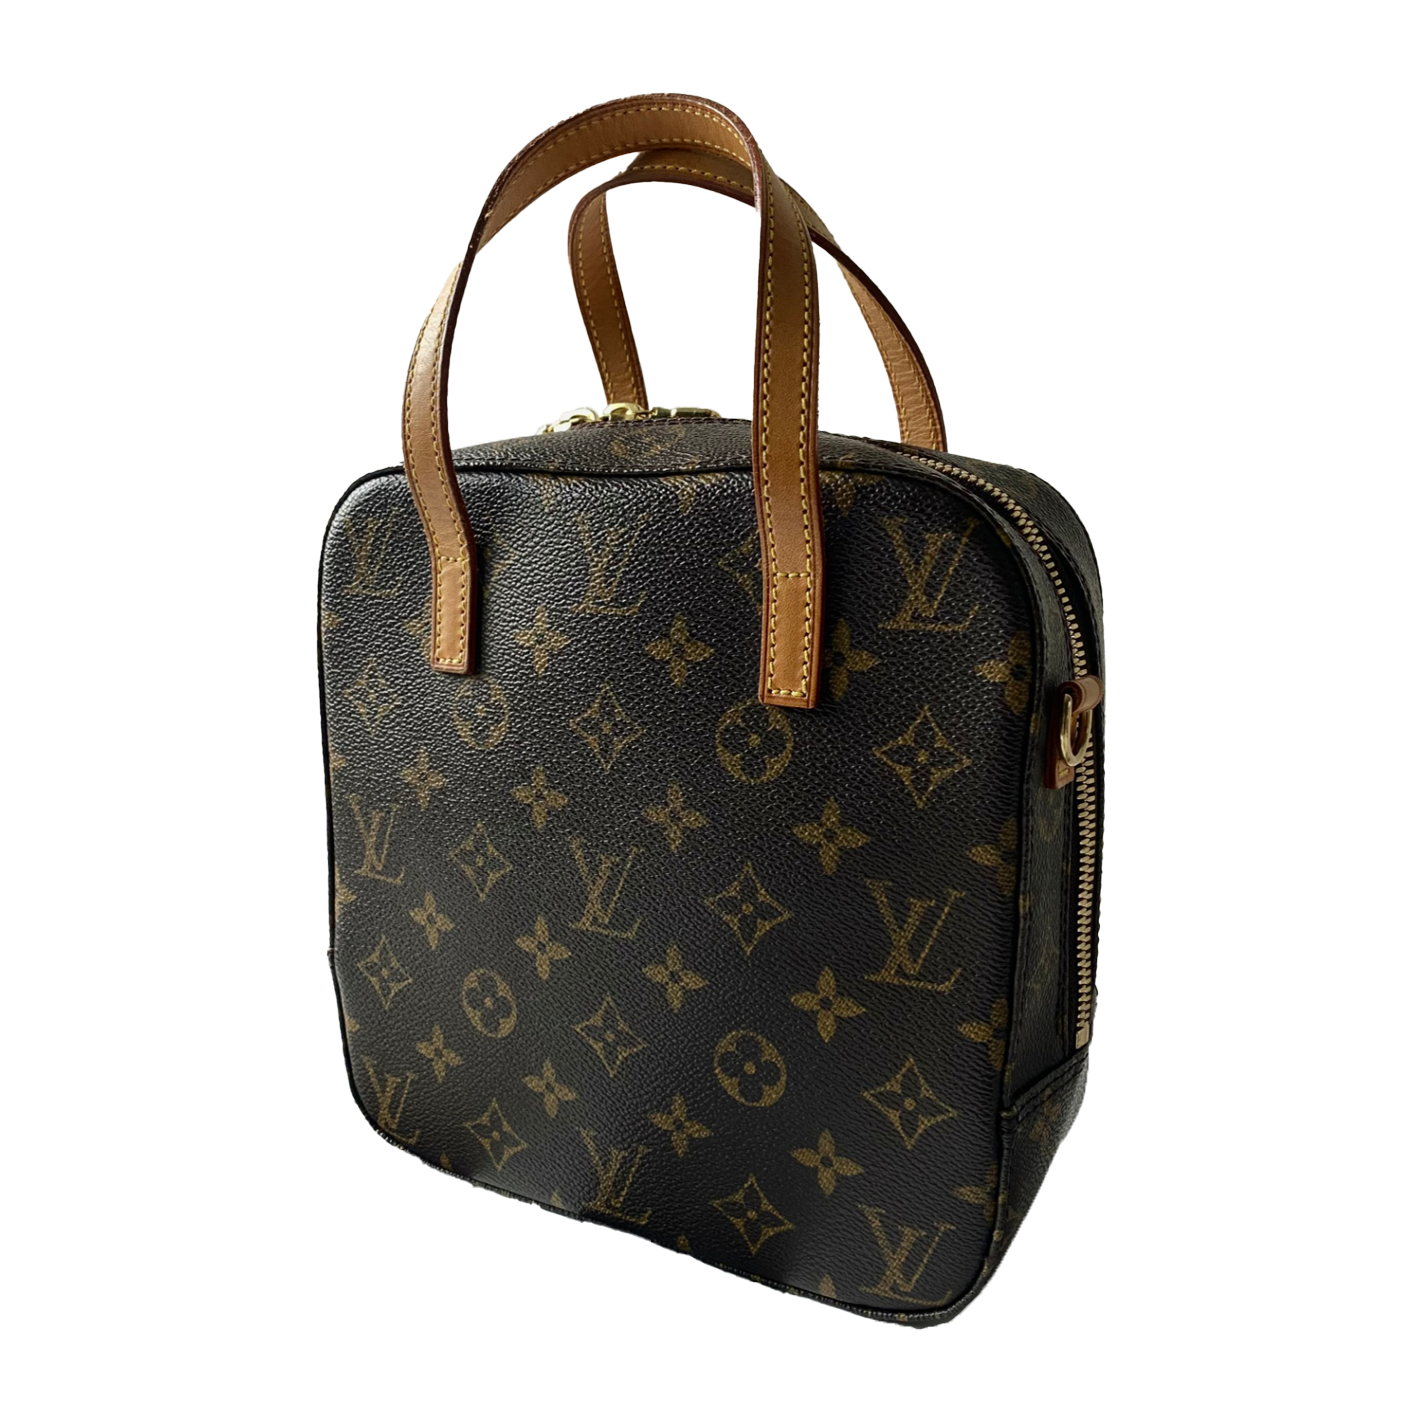 Malesherbes leather handbag Louis Vuitton Black in Leather - 31687280